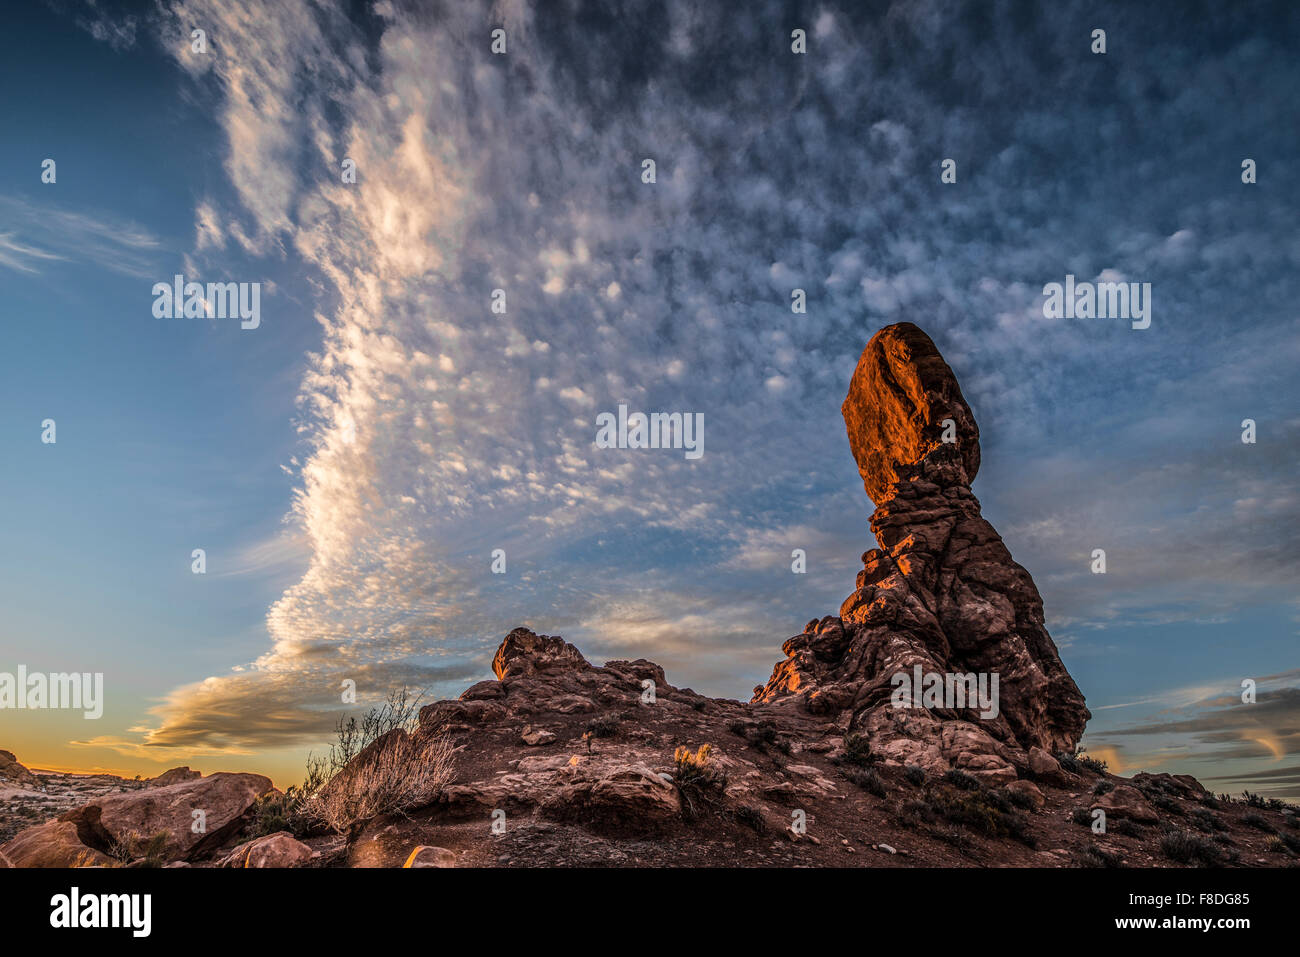 Balanced Rock and clouds, Arches National Park, Utah Entrada sandstone Stock Photo